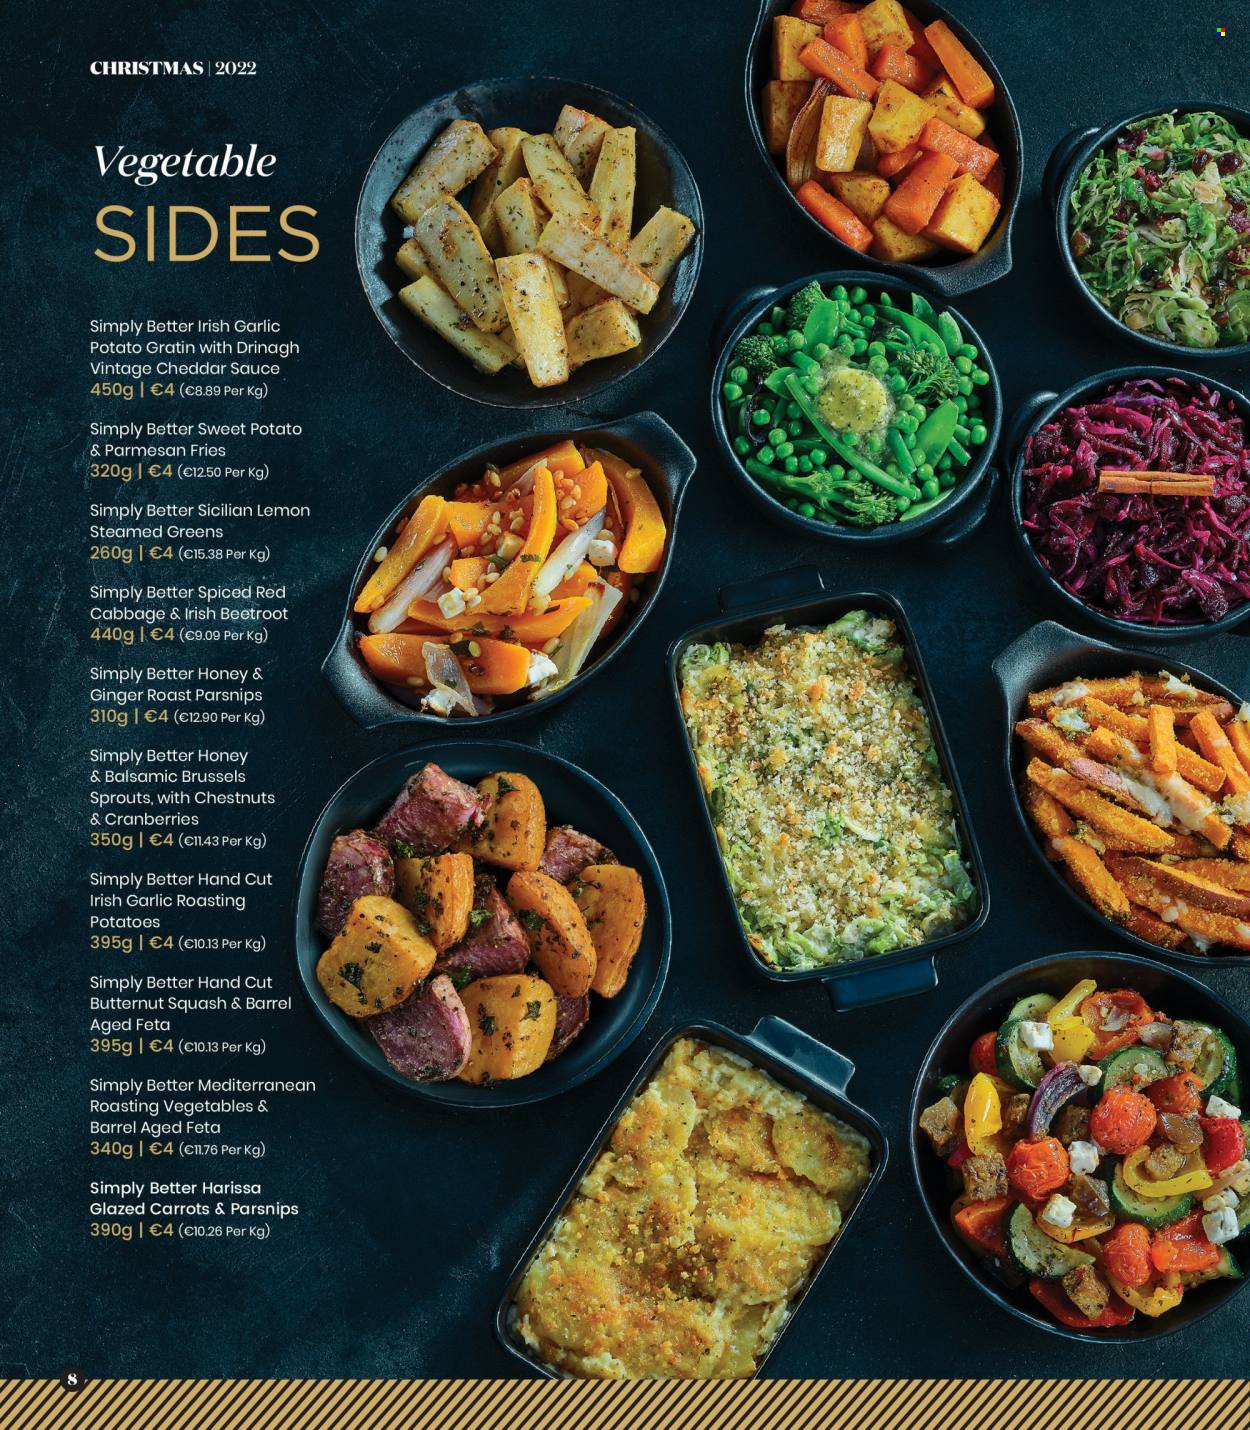 thumbnail - Dunnes Stores offer  - Sales products - butternut squash, cabbage, carrots, potatoes, parsnips, brussel sprouts, beetroot, sauce, cheddar, cheese, feta, potato fries, cranberries, honey, chestnuts. Page 8.